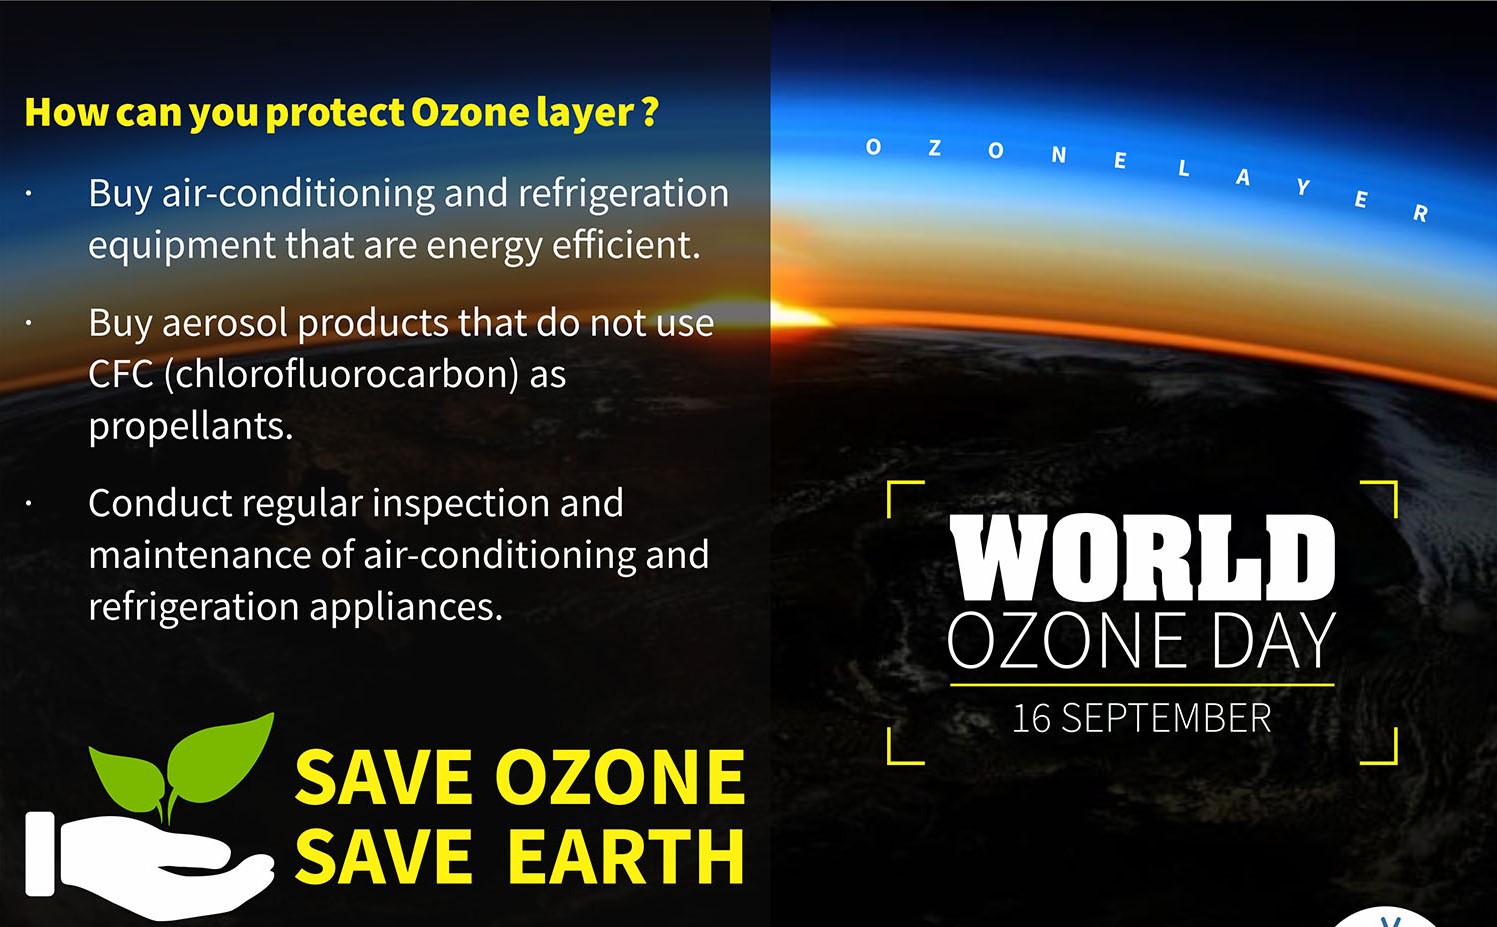 Ozone Day article